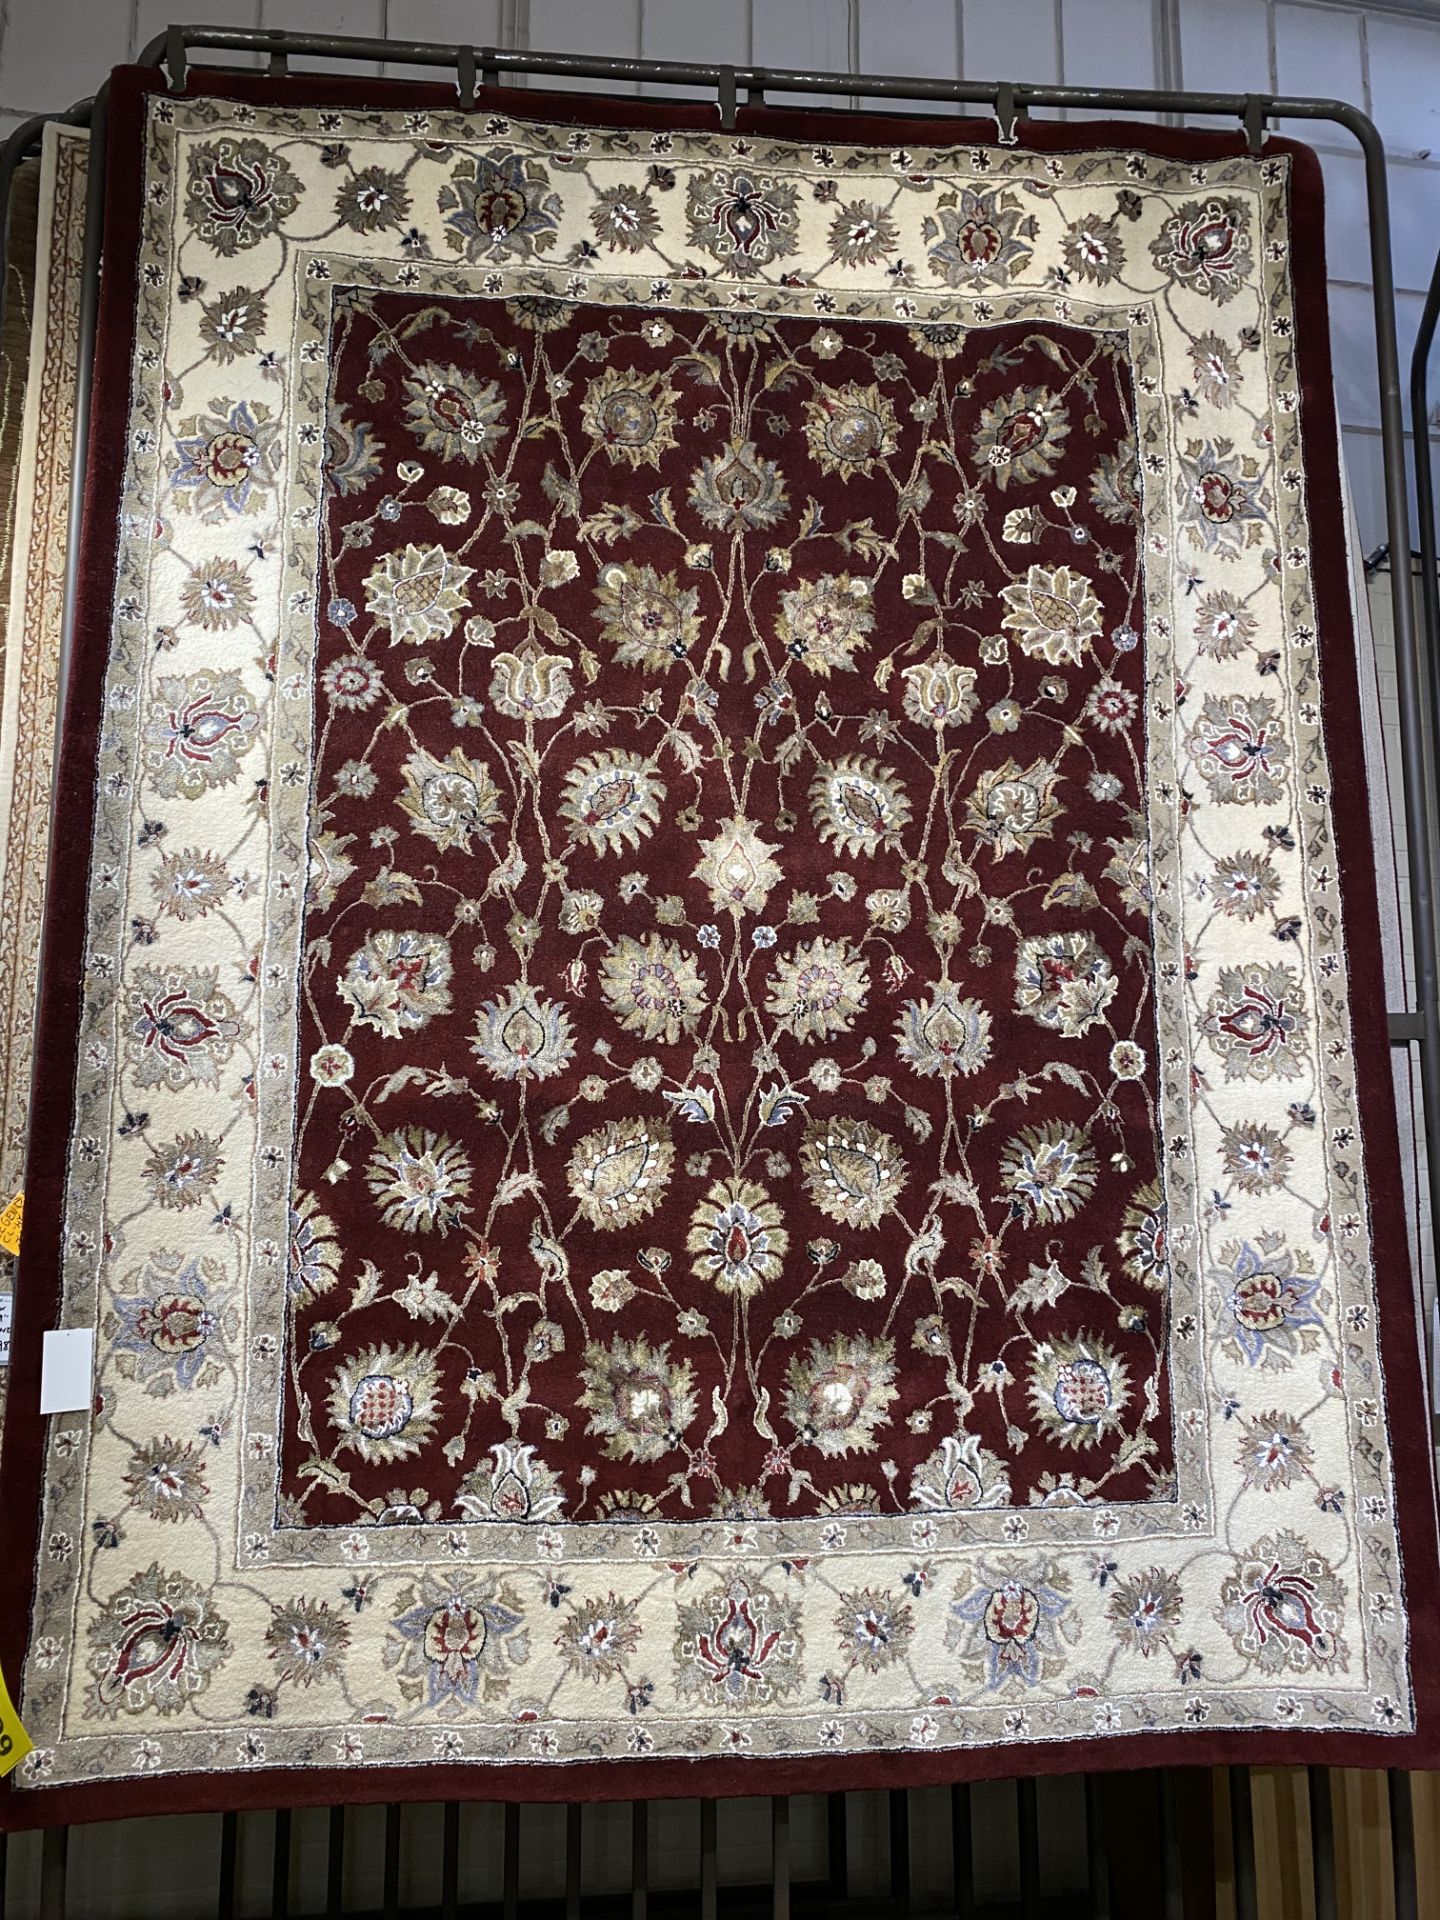 8' X 10' WOOL/A.SILK HAND TUFTED IN INDIA, MSRP $3,595, INVENTORY CODE LEGEND2IMAD922 D.RDWHT